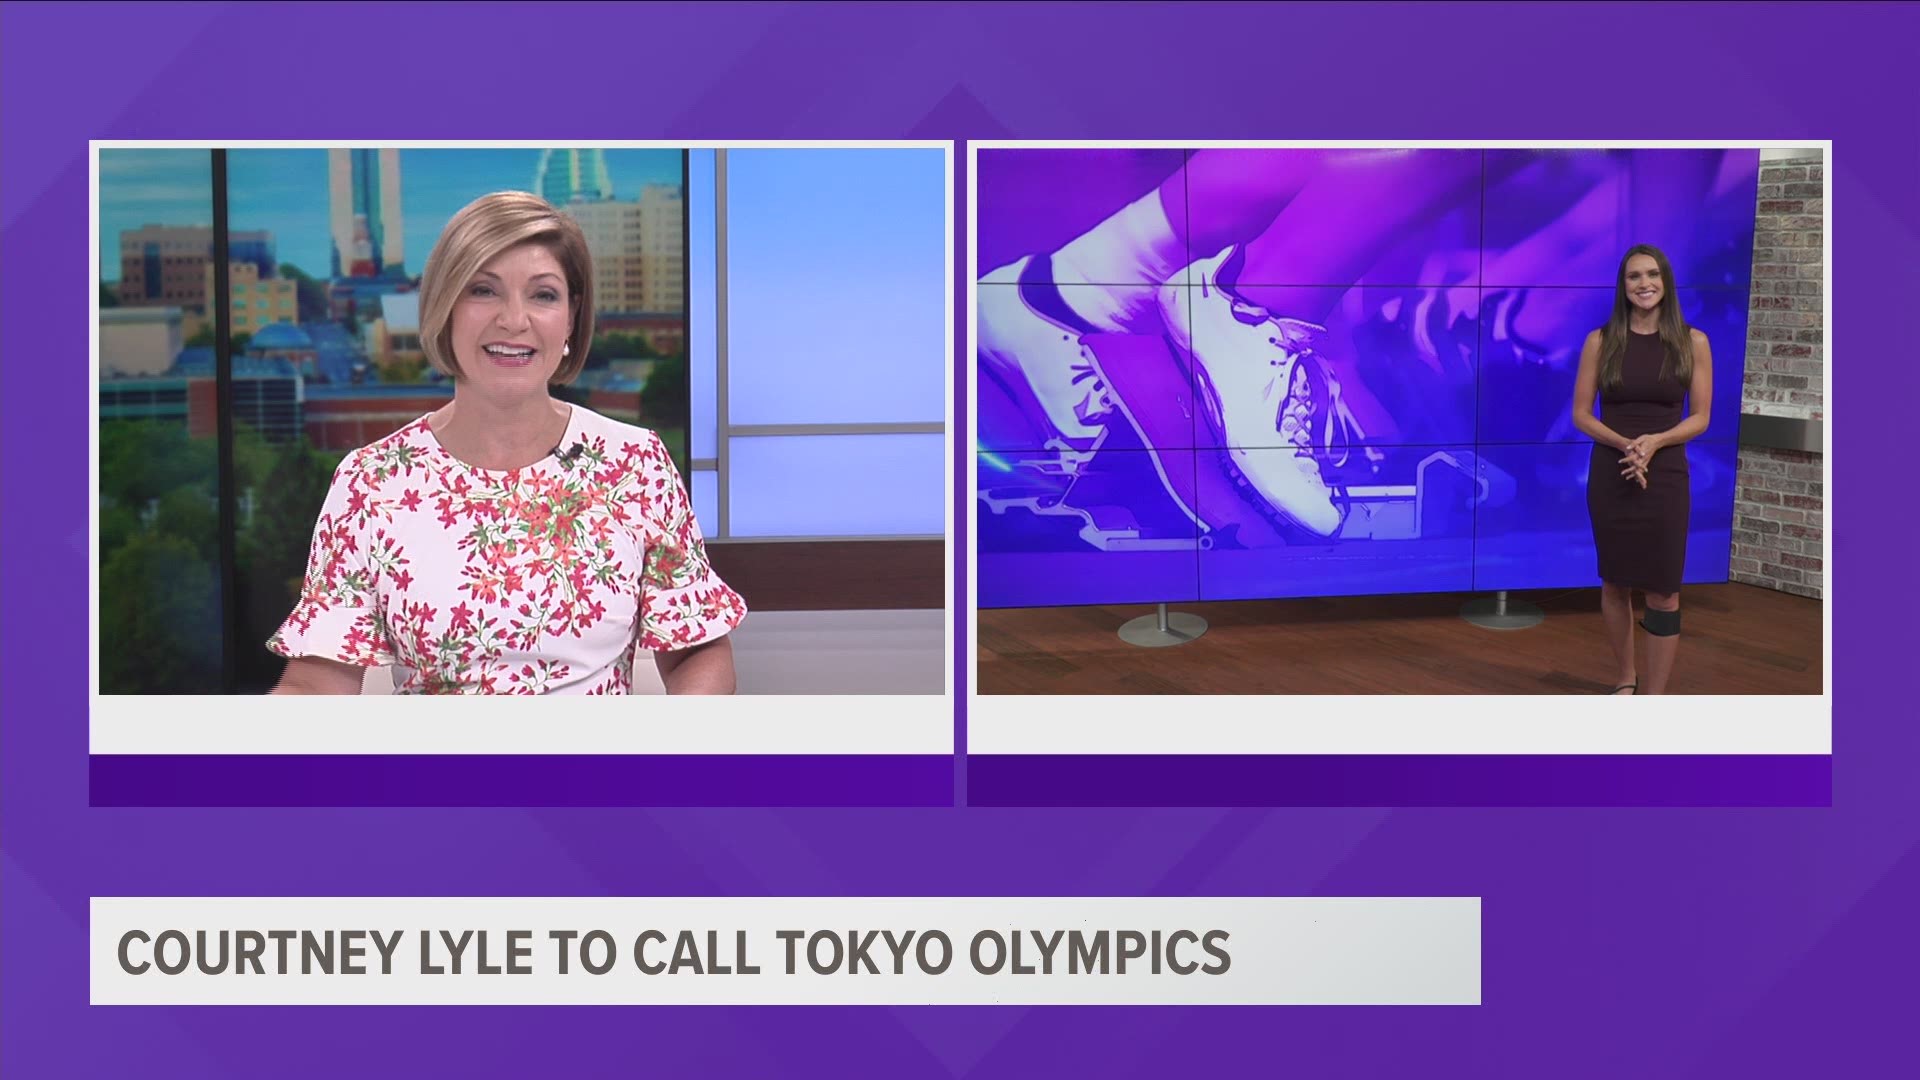 Lyle serves as a national play-by-play analyst. She's called six different sports, from basketball to gymnastics and will call field hockey in the Olympics.